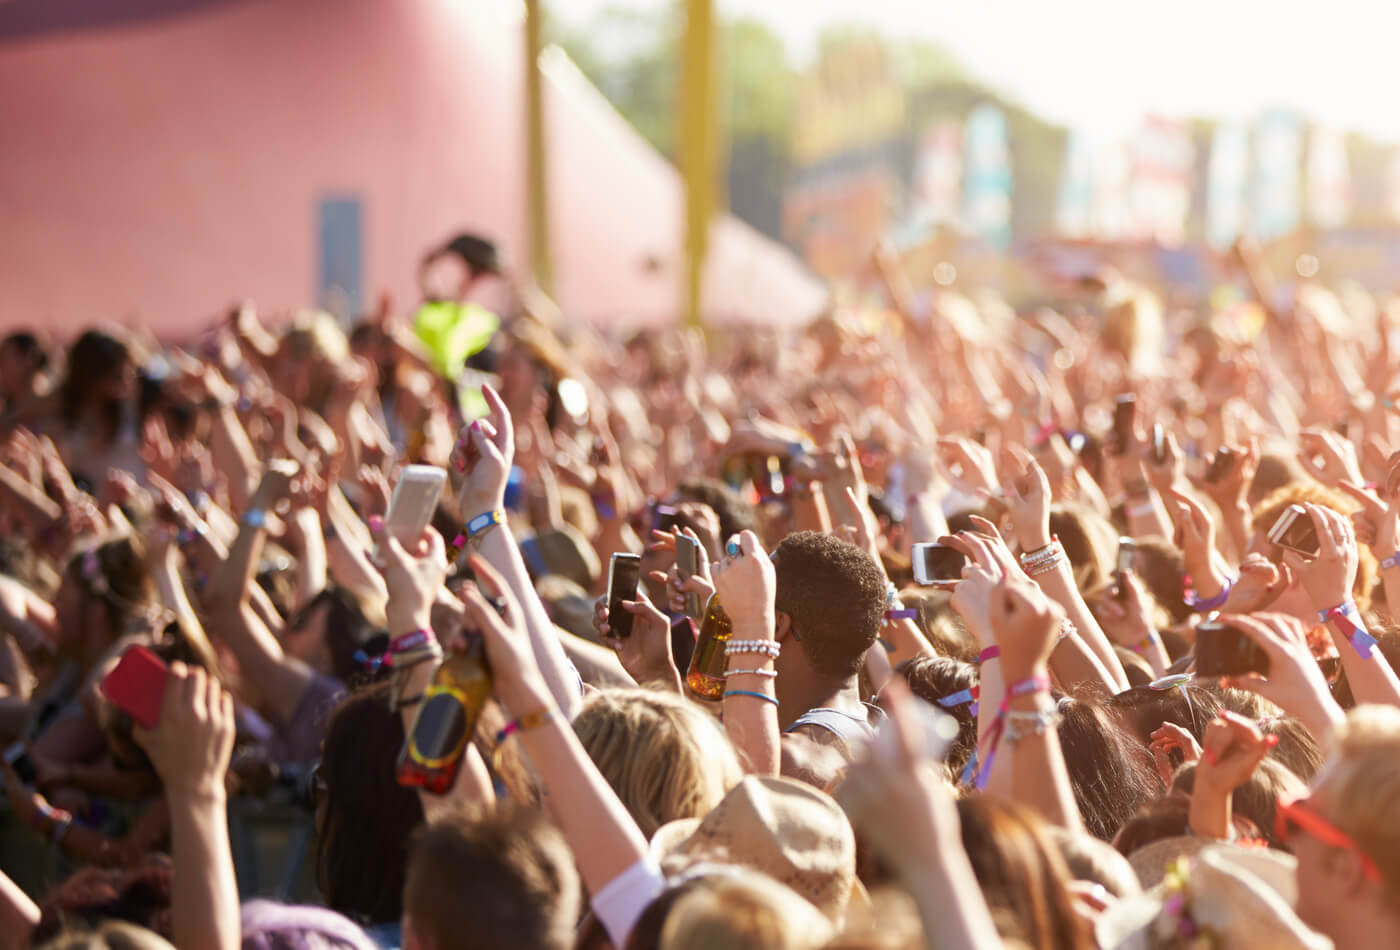 Audience with their hands in the air at an outdoor music festival